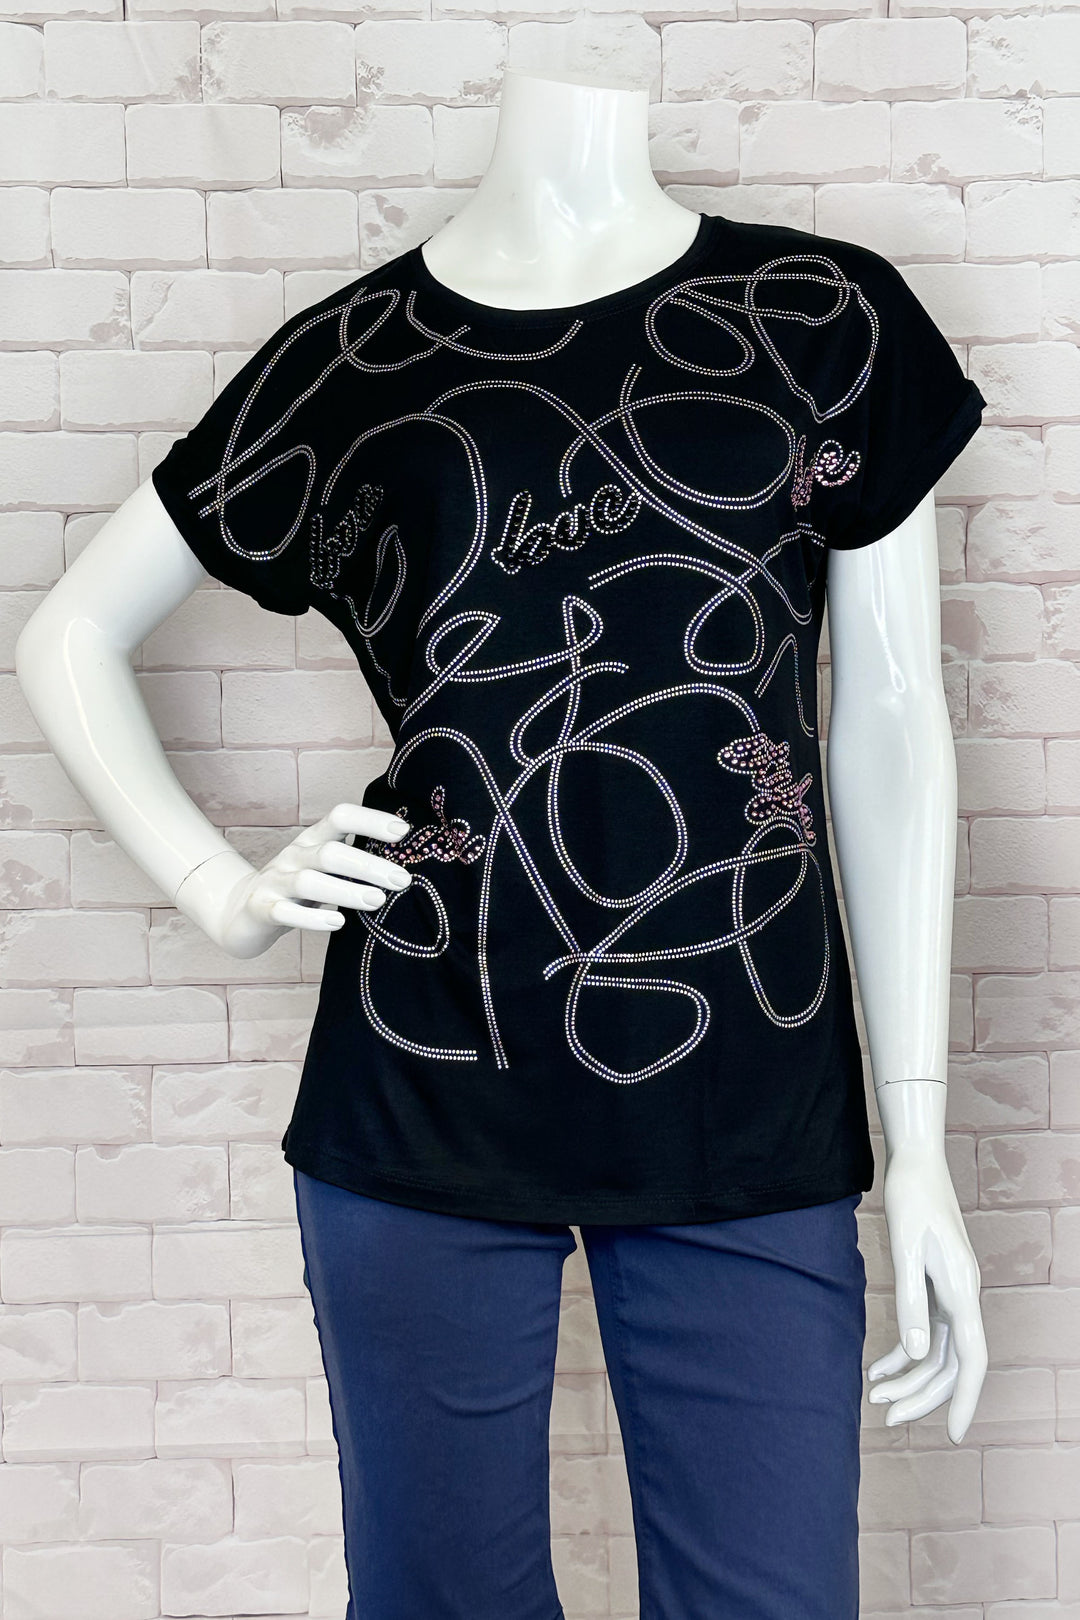 Ness Spring 2024 The round neckline and short sleeves make it easy and comfortable to wear, while the standout abstract love print on the front adds a touch of fun and playfulness to any outfit.